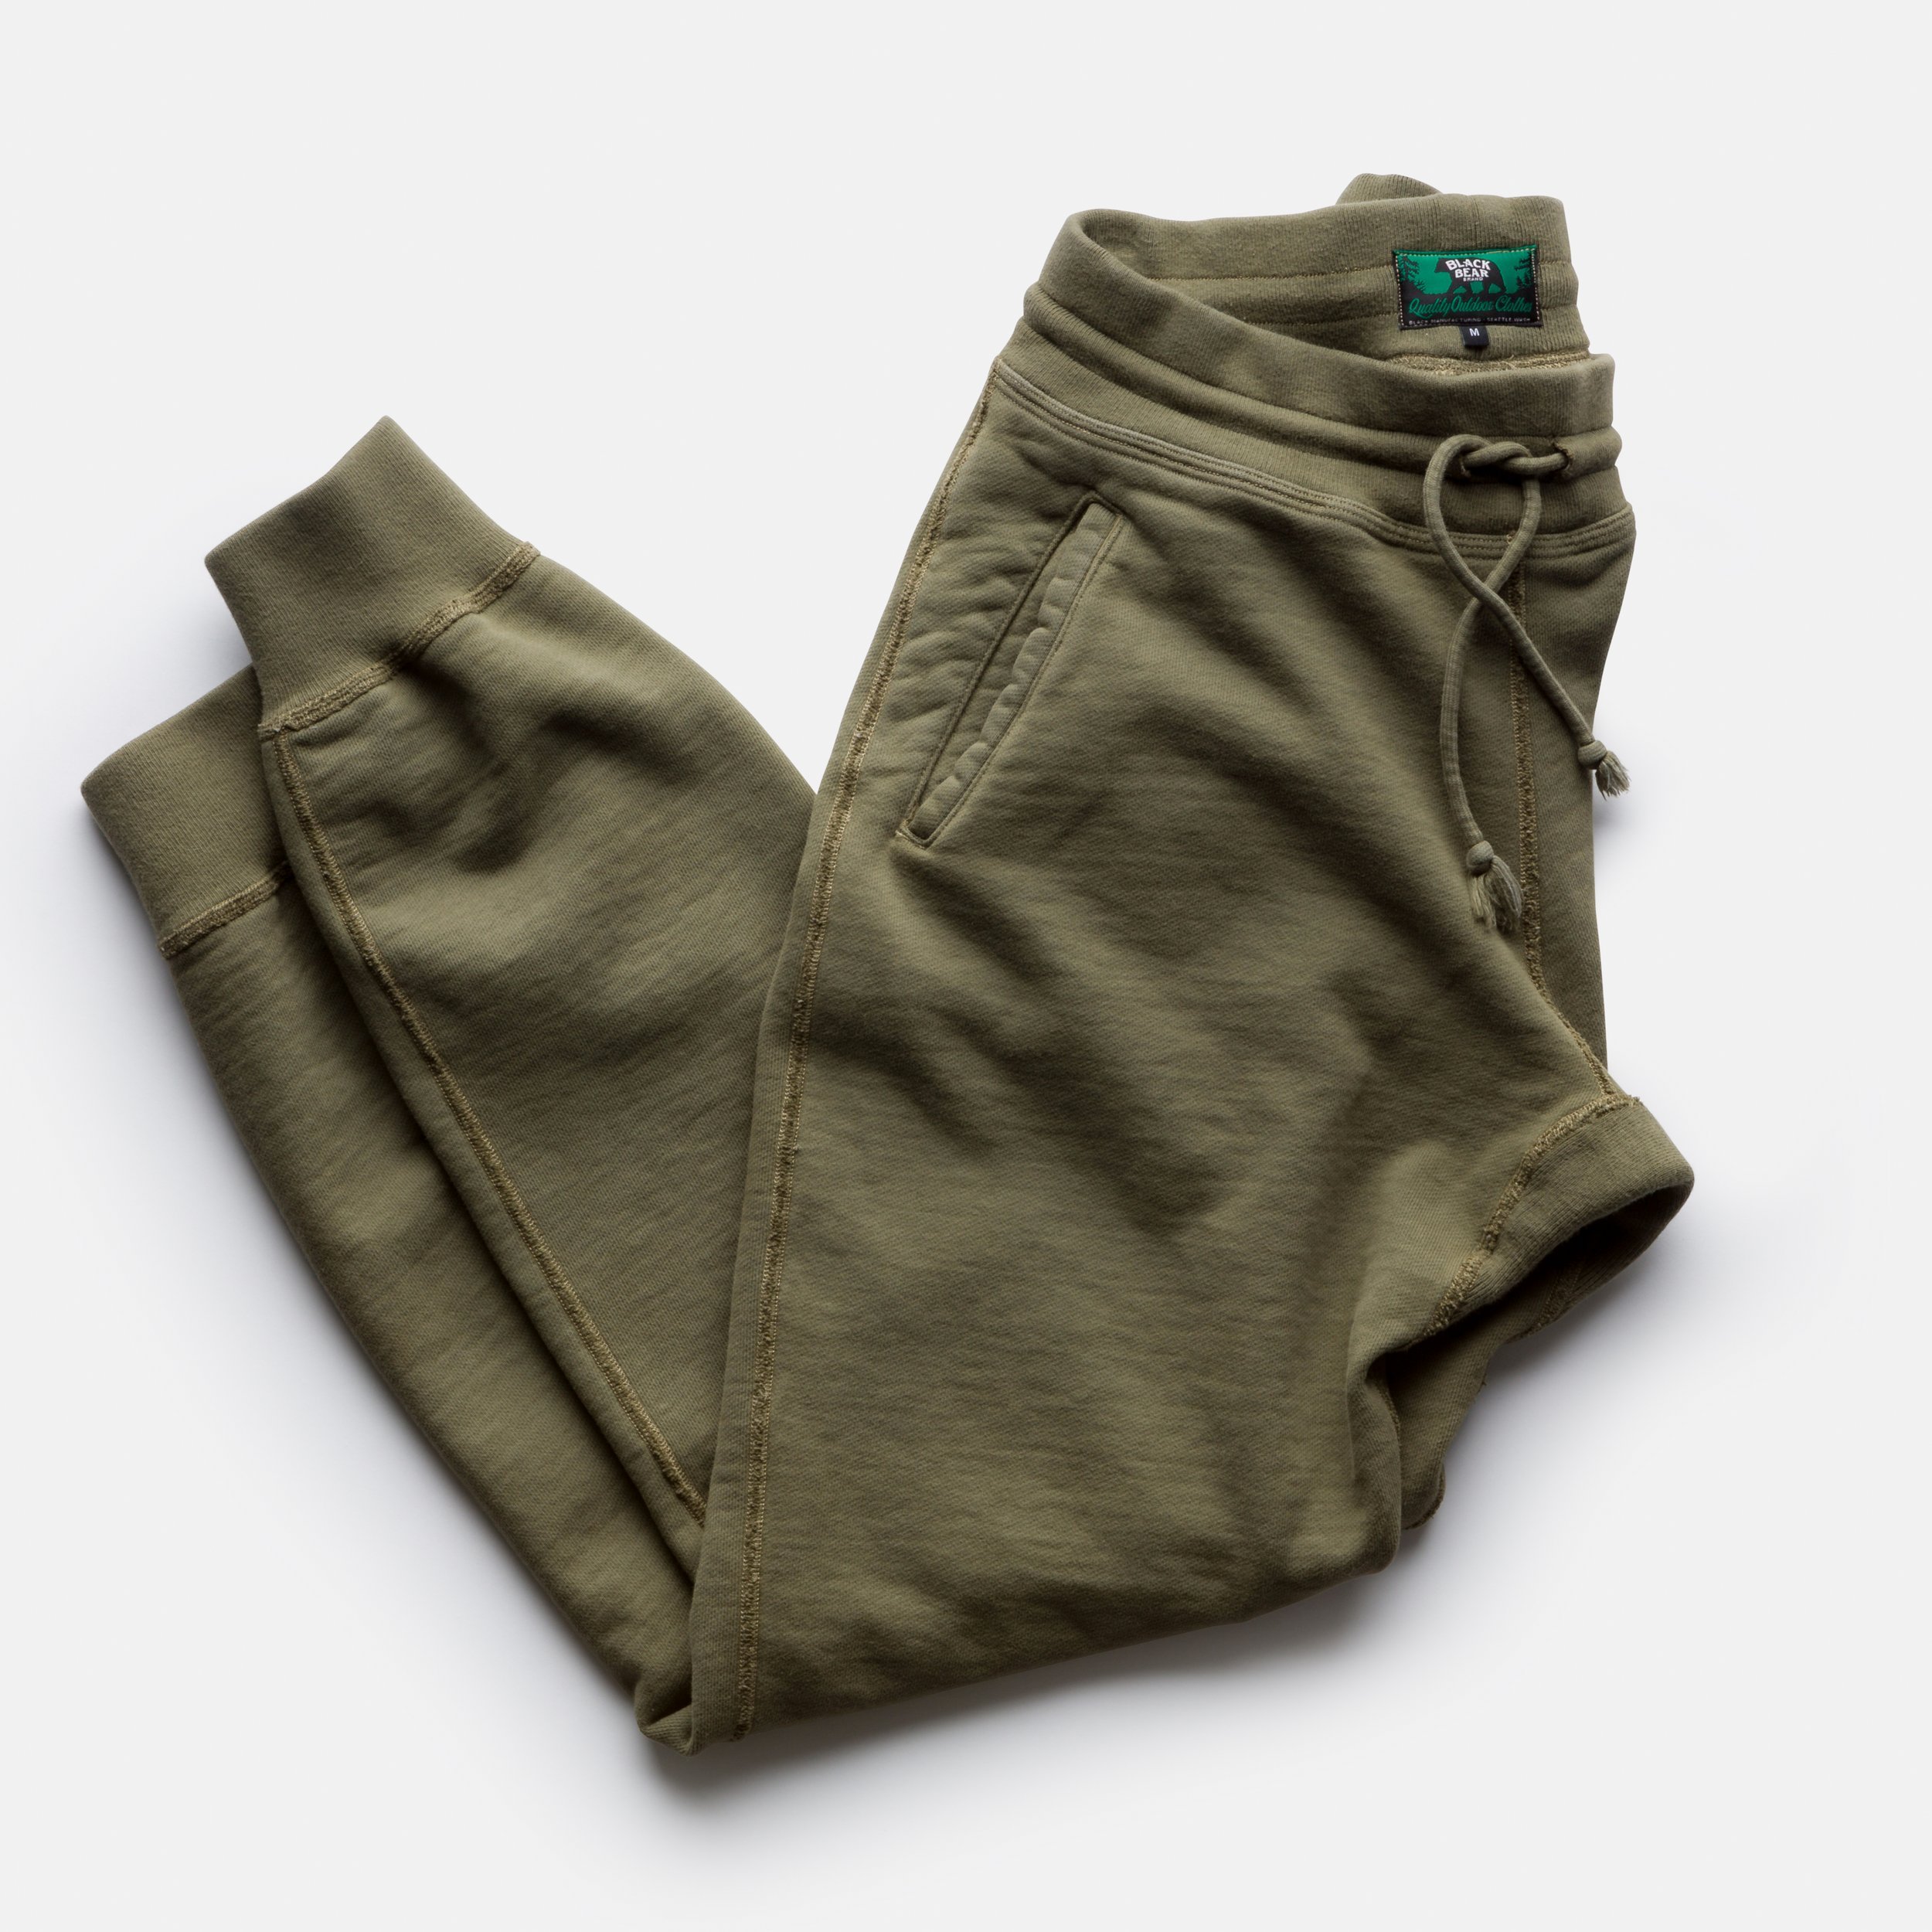 inely crafted 30 oz. Terry sweat pants from Black Bear Brand,